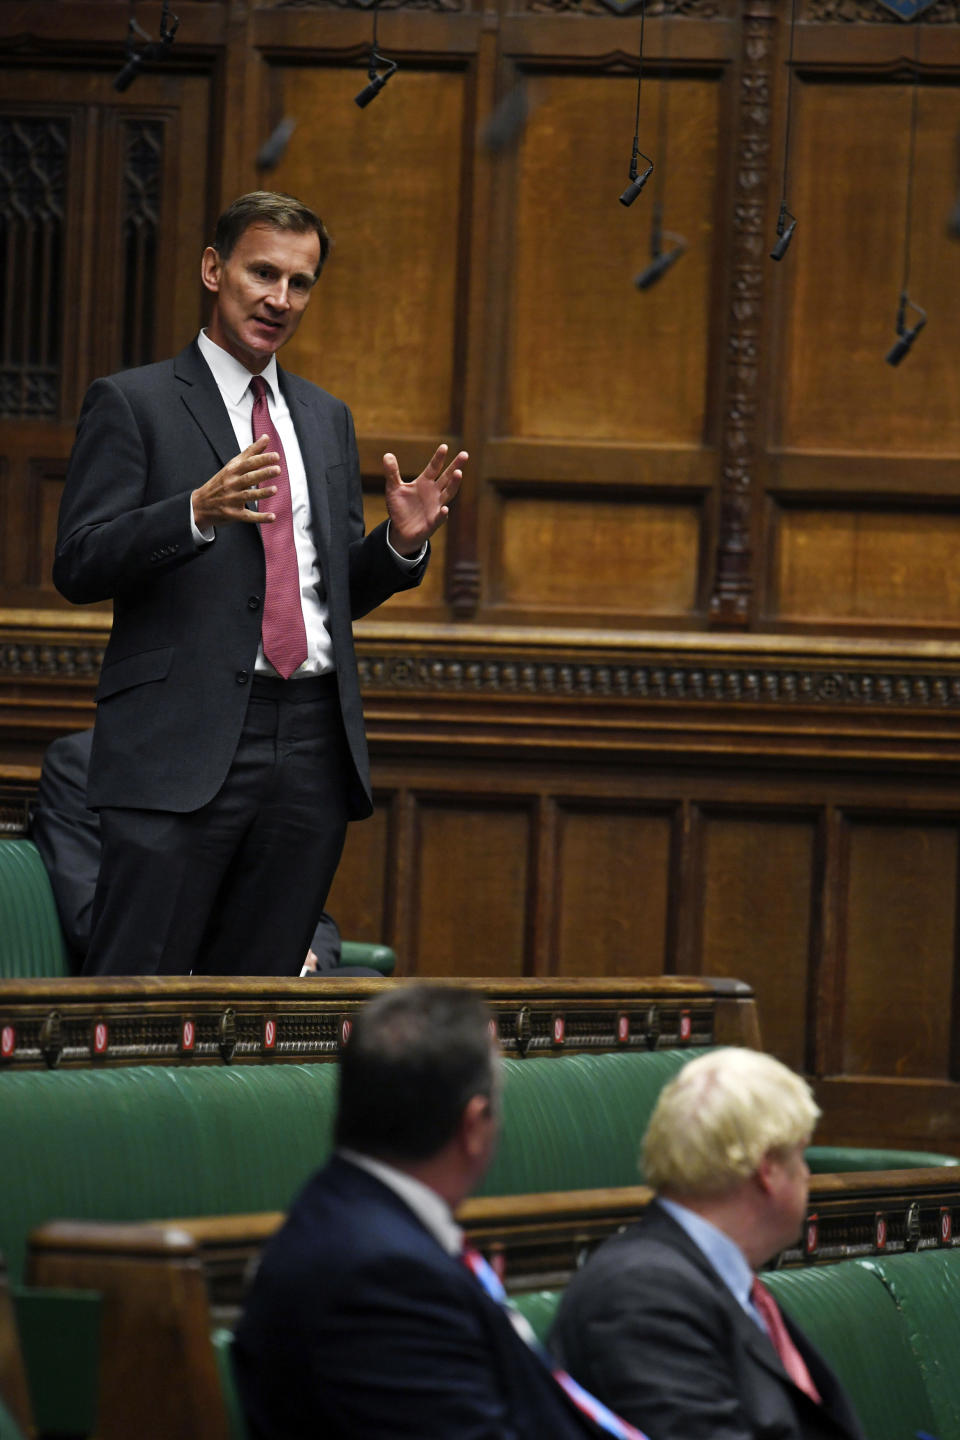 In this handout photo provided by UK Parliament, MP Jeremy Hunt responds after Prime Minister Boris Johnson delivered a statement in the House of Commons, London, Tuesday, Sept. 22, 2020. Johnson has warned Britons they should not expect to return to a normal social or work life for at least six months, as he announced new restrictions he hopes will suppress a surge in coronavirus cases. (Jessica Taylor/UK Parliament via AP)